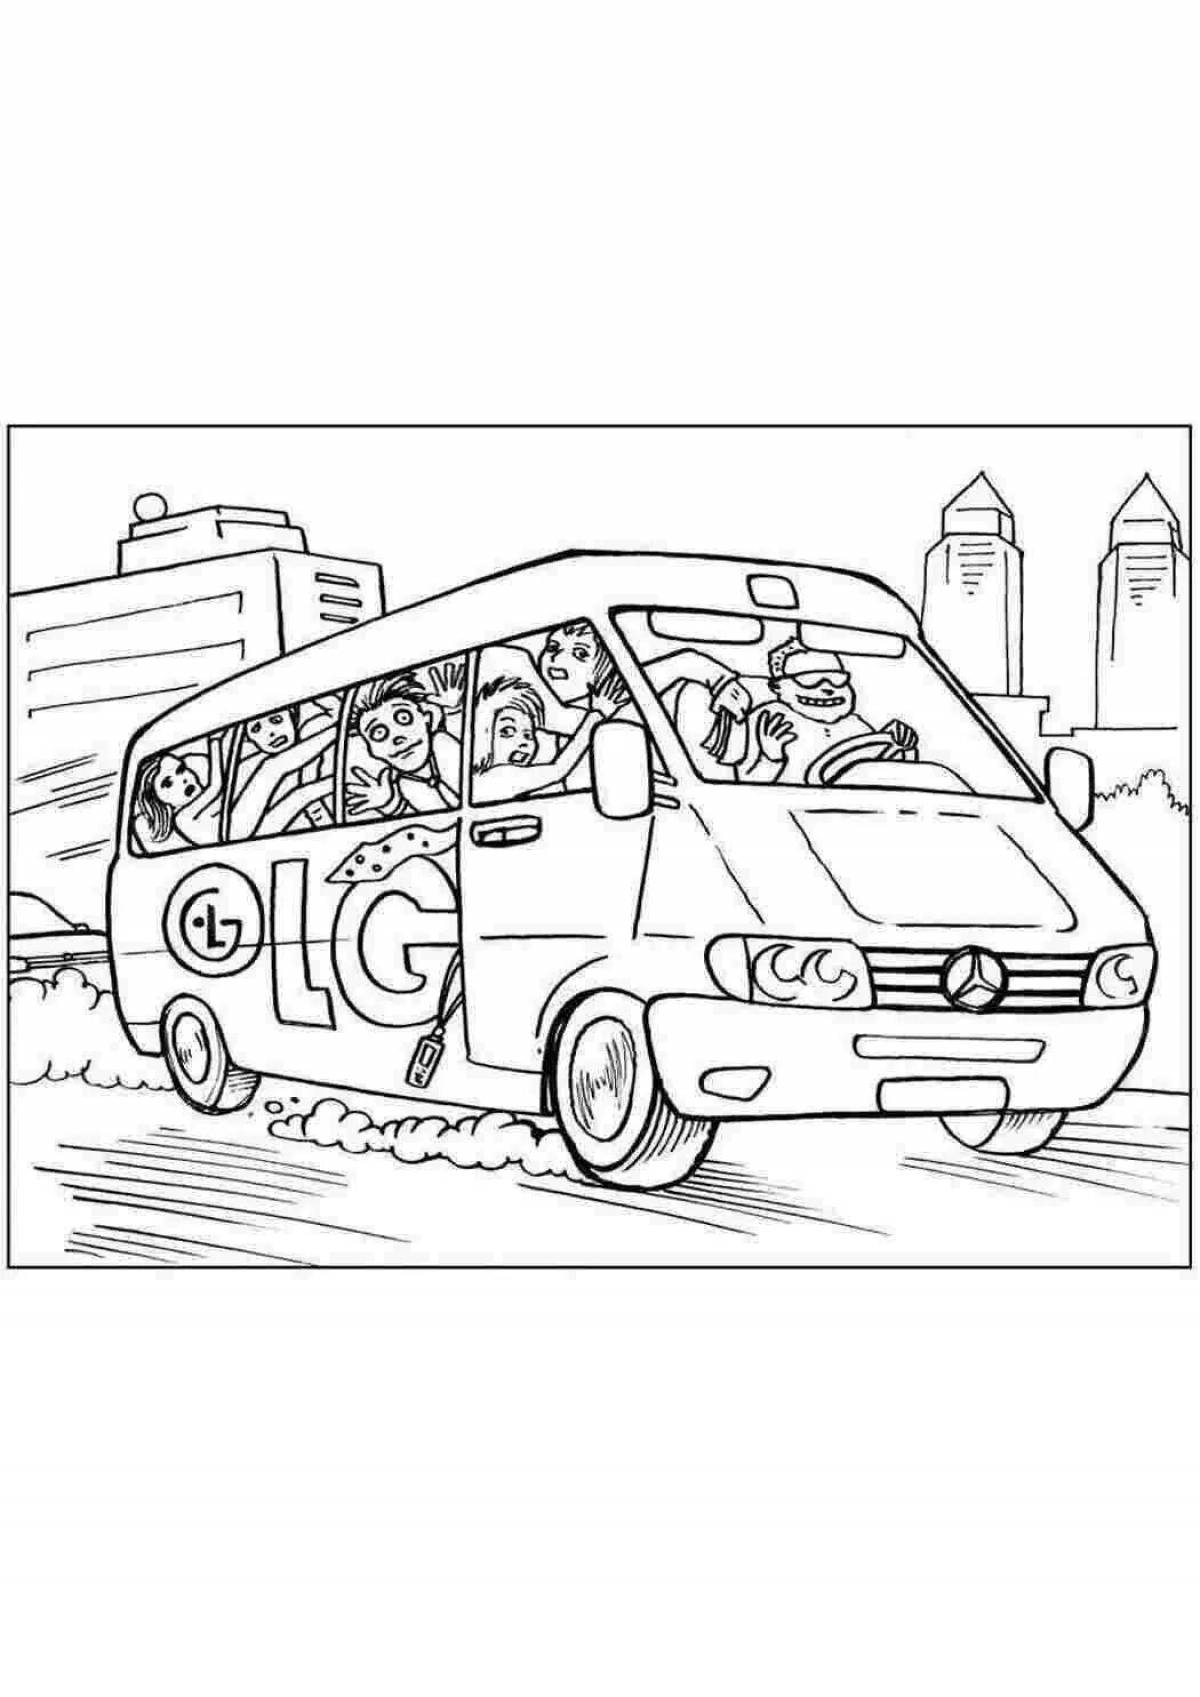 Charming bus coloring page